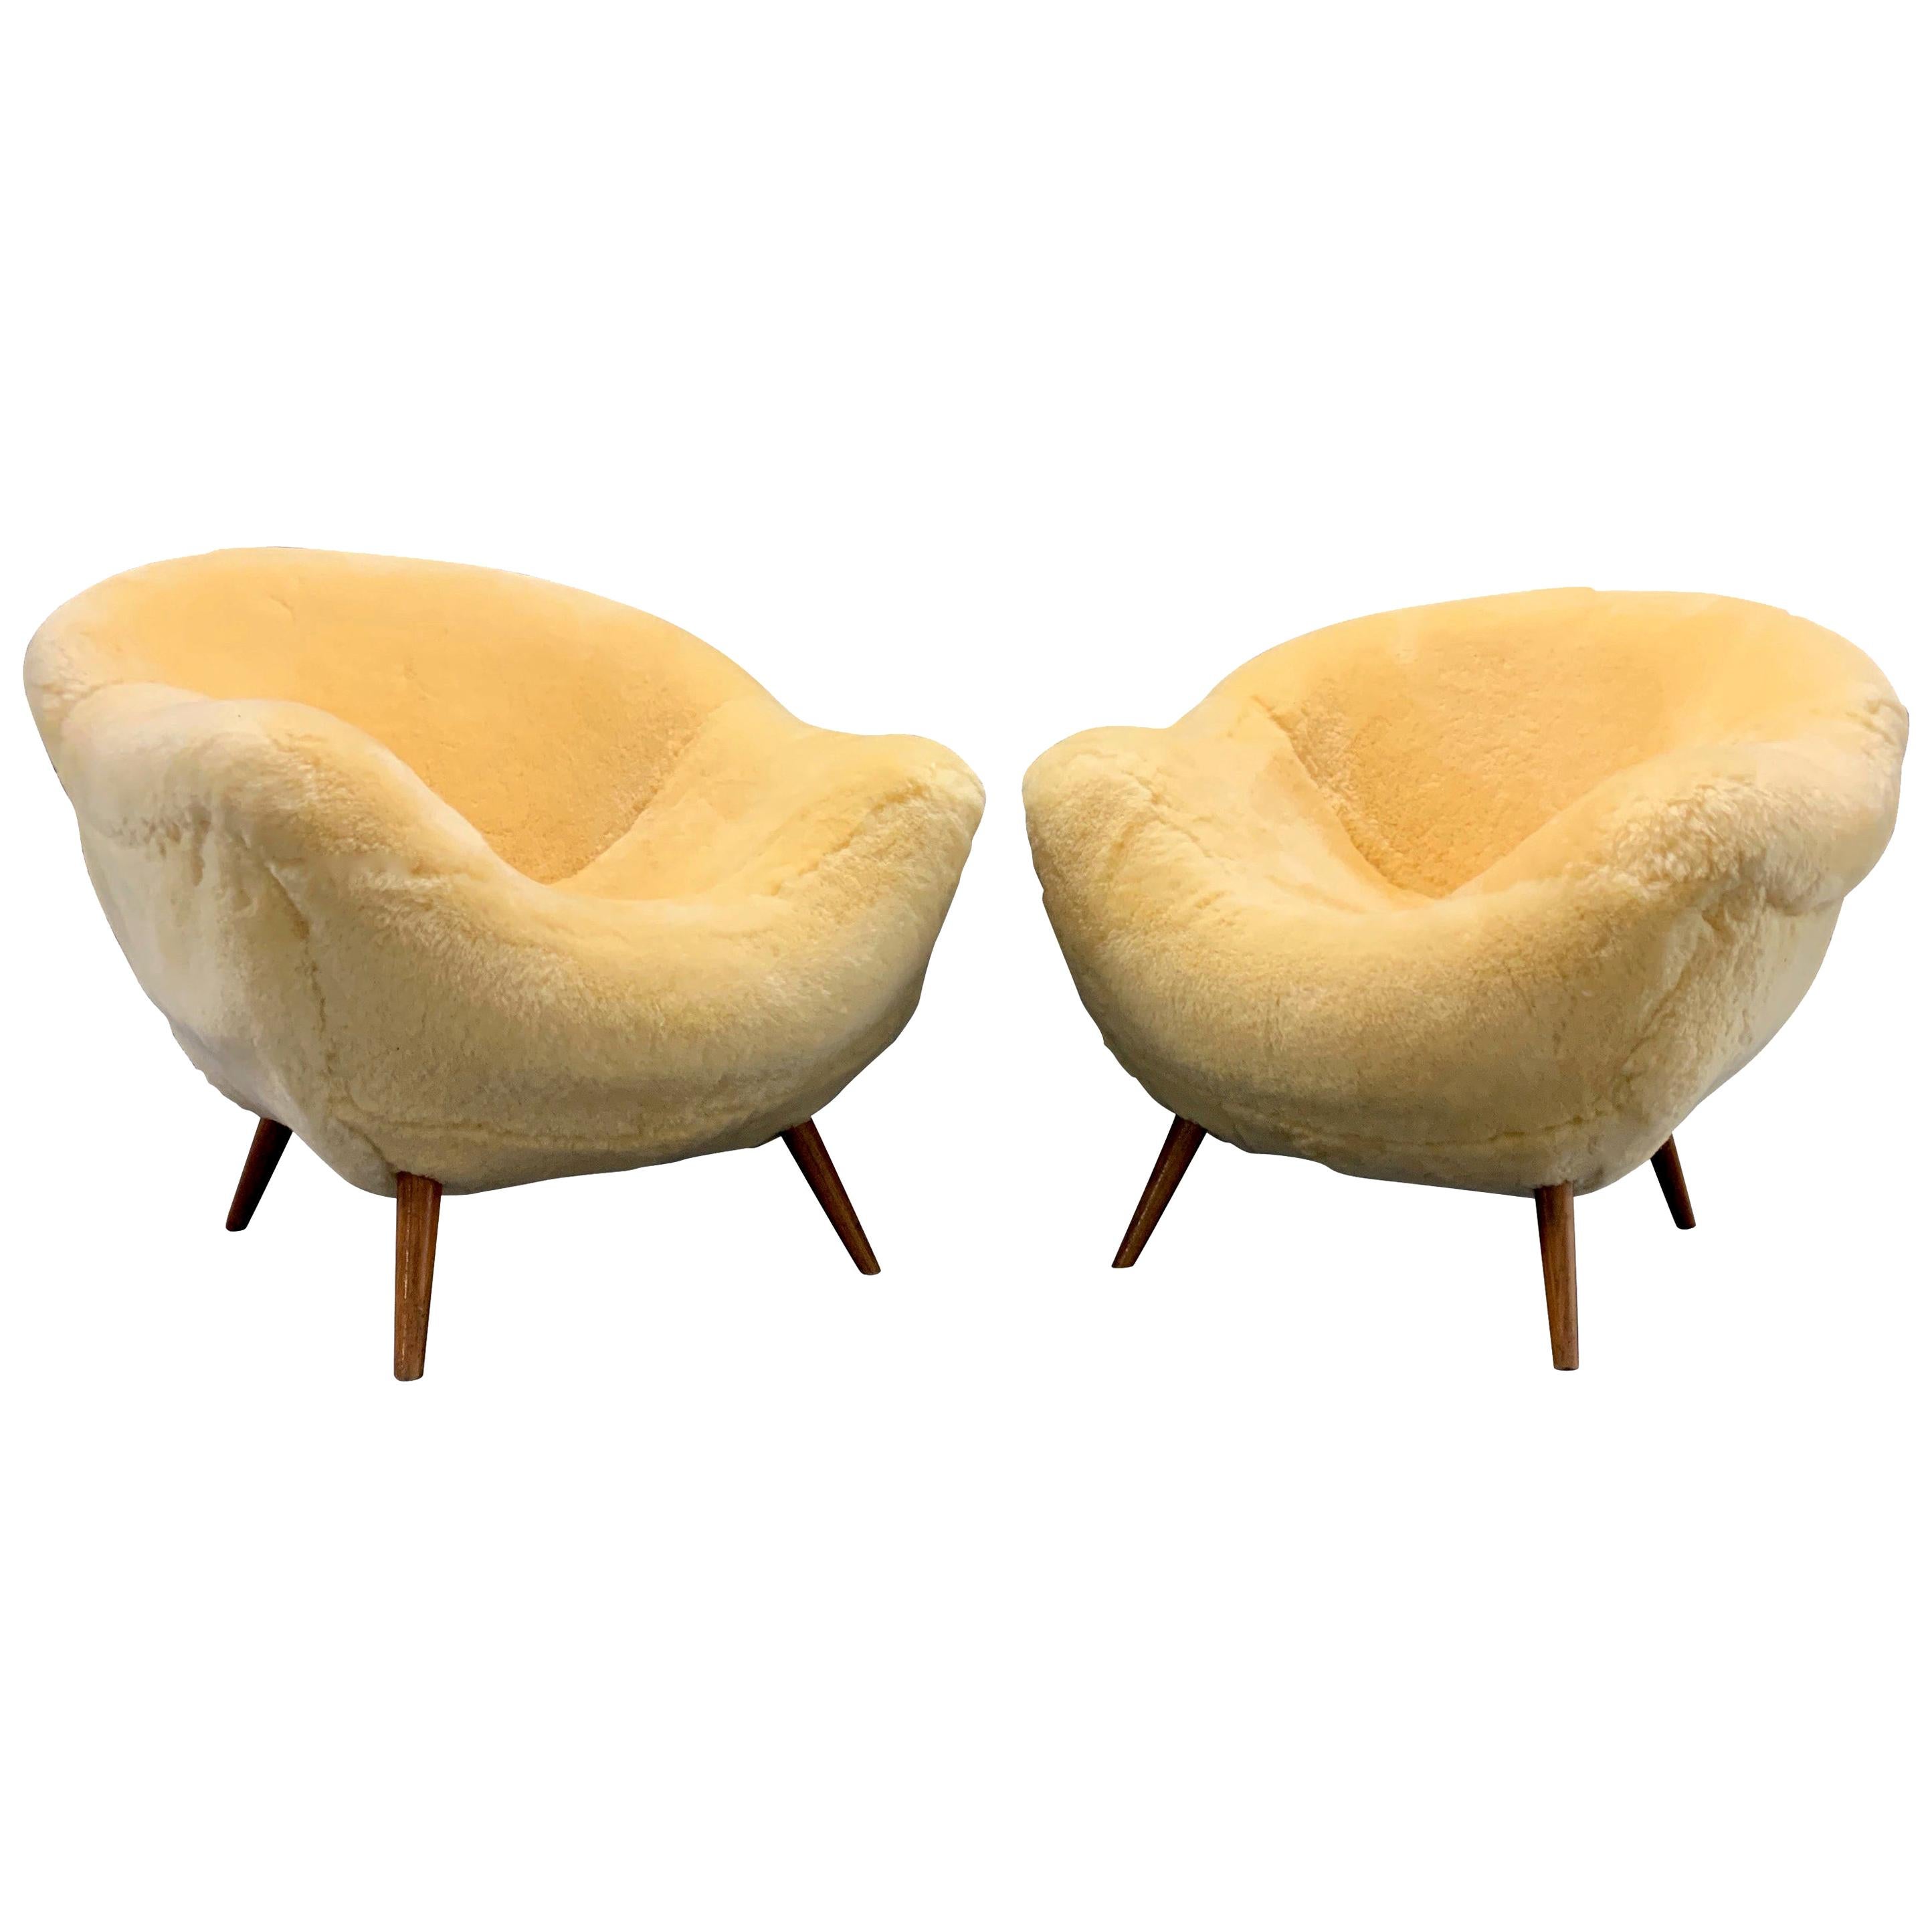 Set of 2 Wonderful and Cosy Sheepskin Chairs attributed to Jean Royere